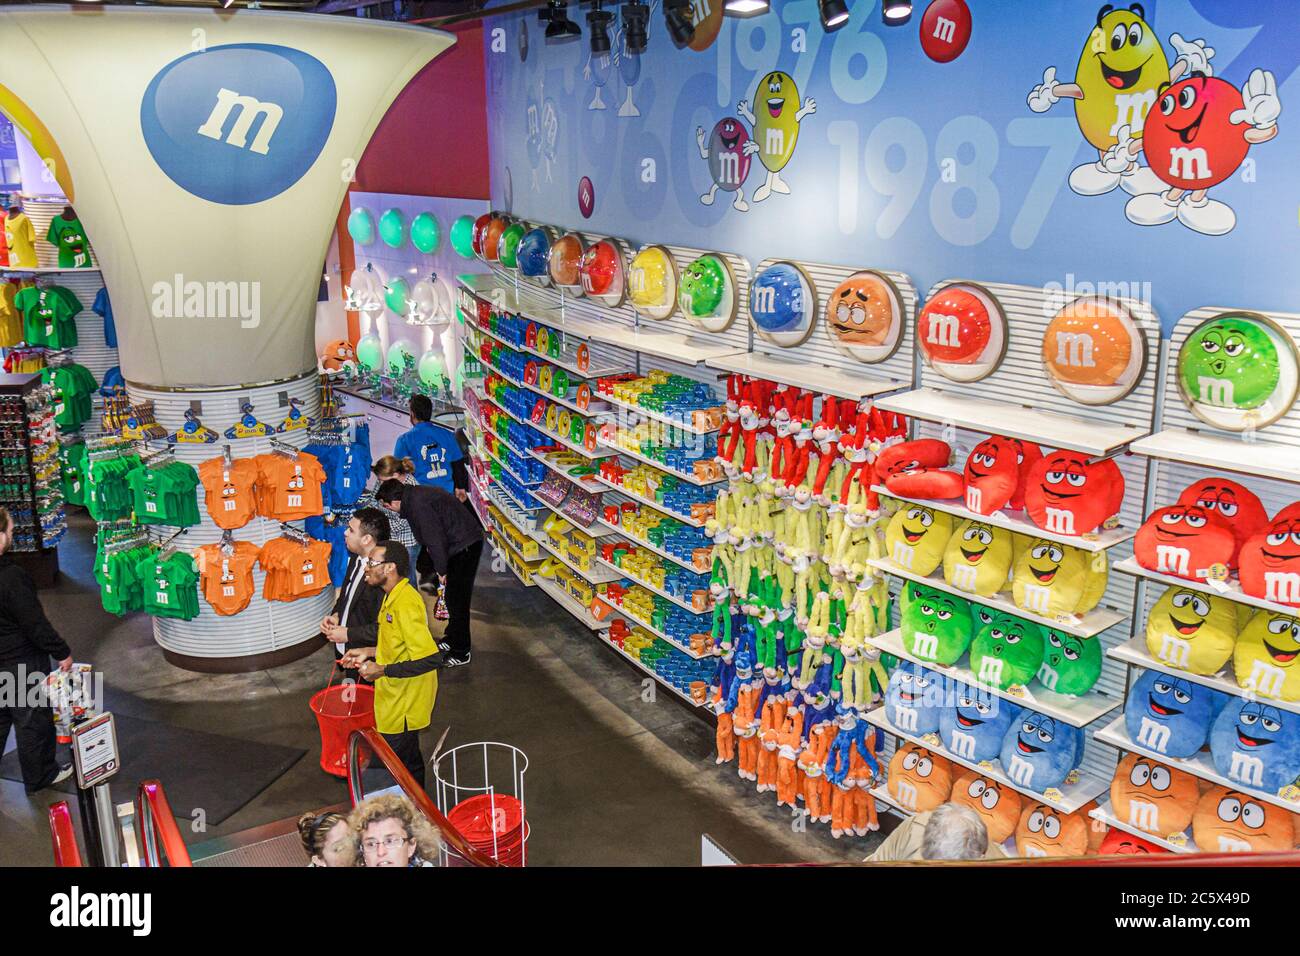 New York City,NYC NY Manhattan,Midtown,Times Square,M&M's World,theme store,shopping shopper shoppers shop shops market markets marketplace buying sel Stock Photo